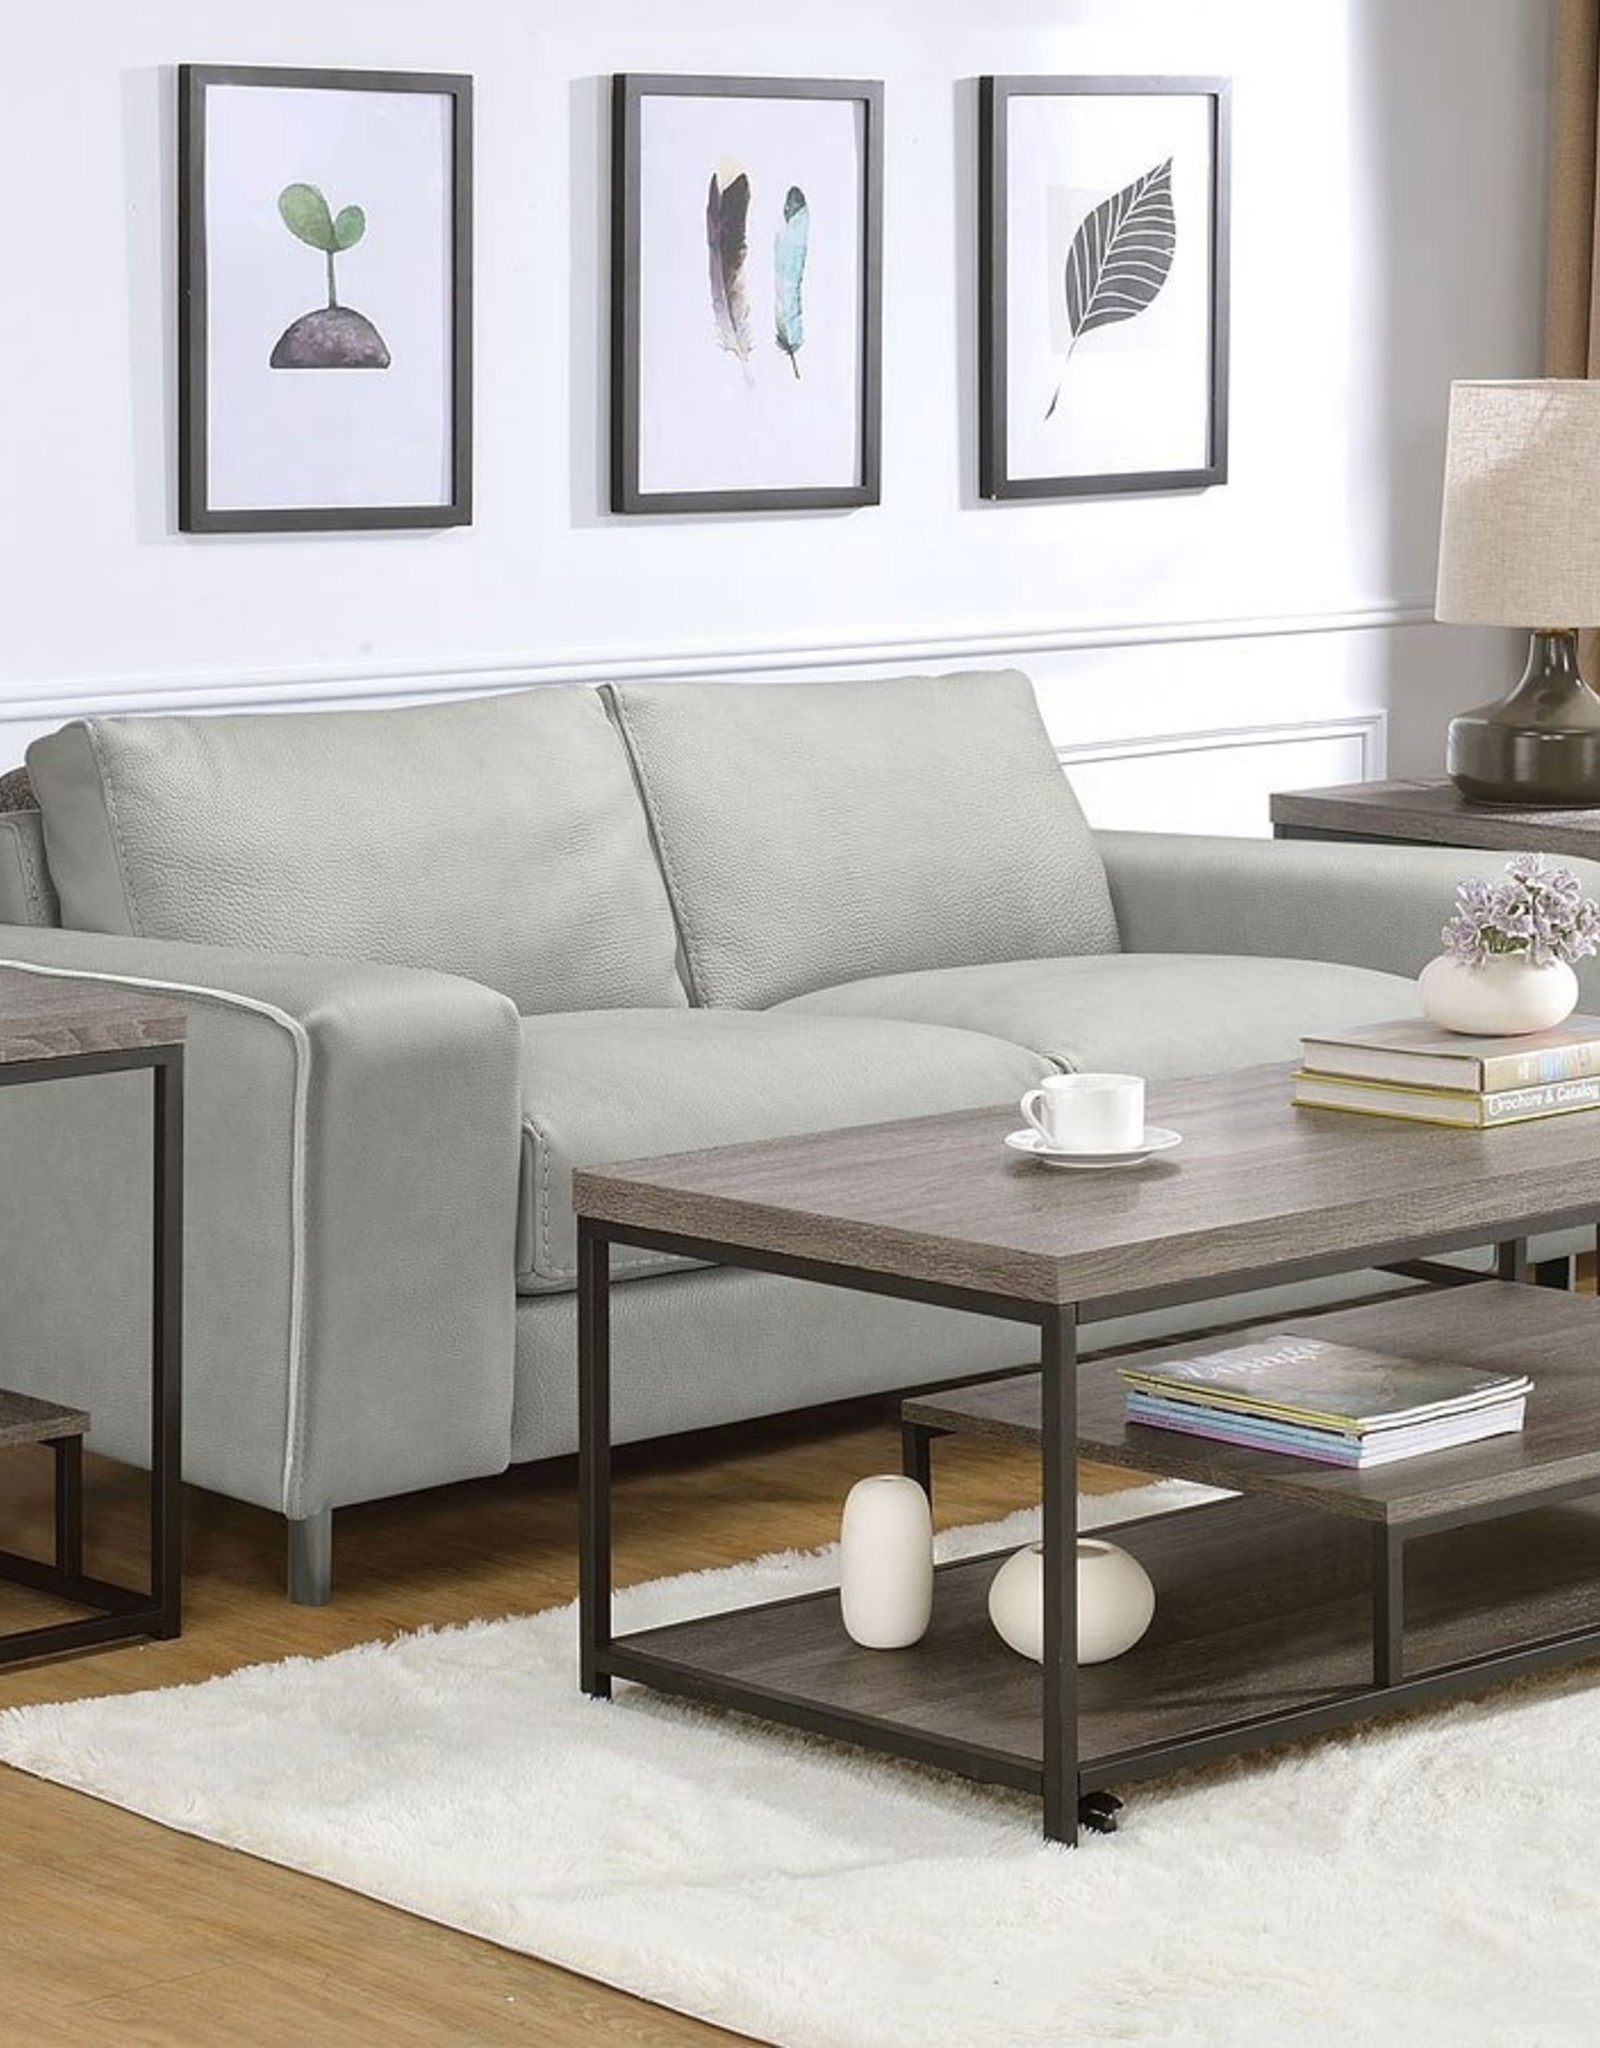 CLS Clemens 3 pc coffee table set- CLS